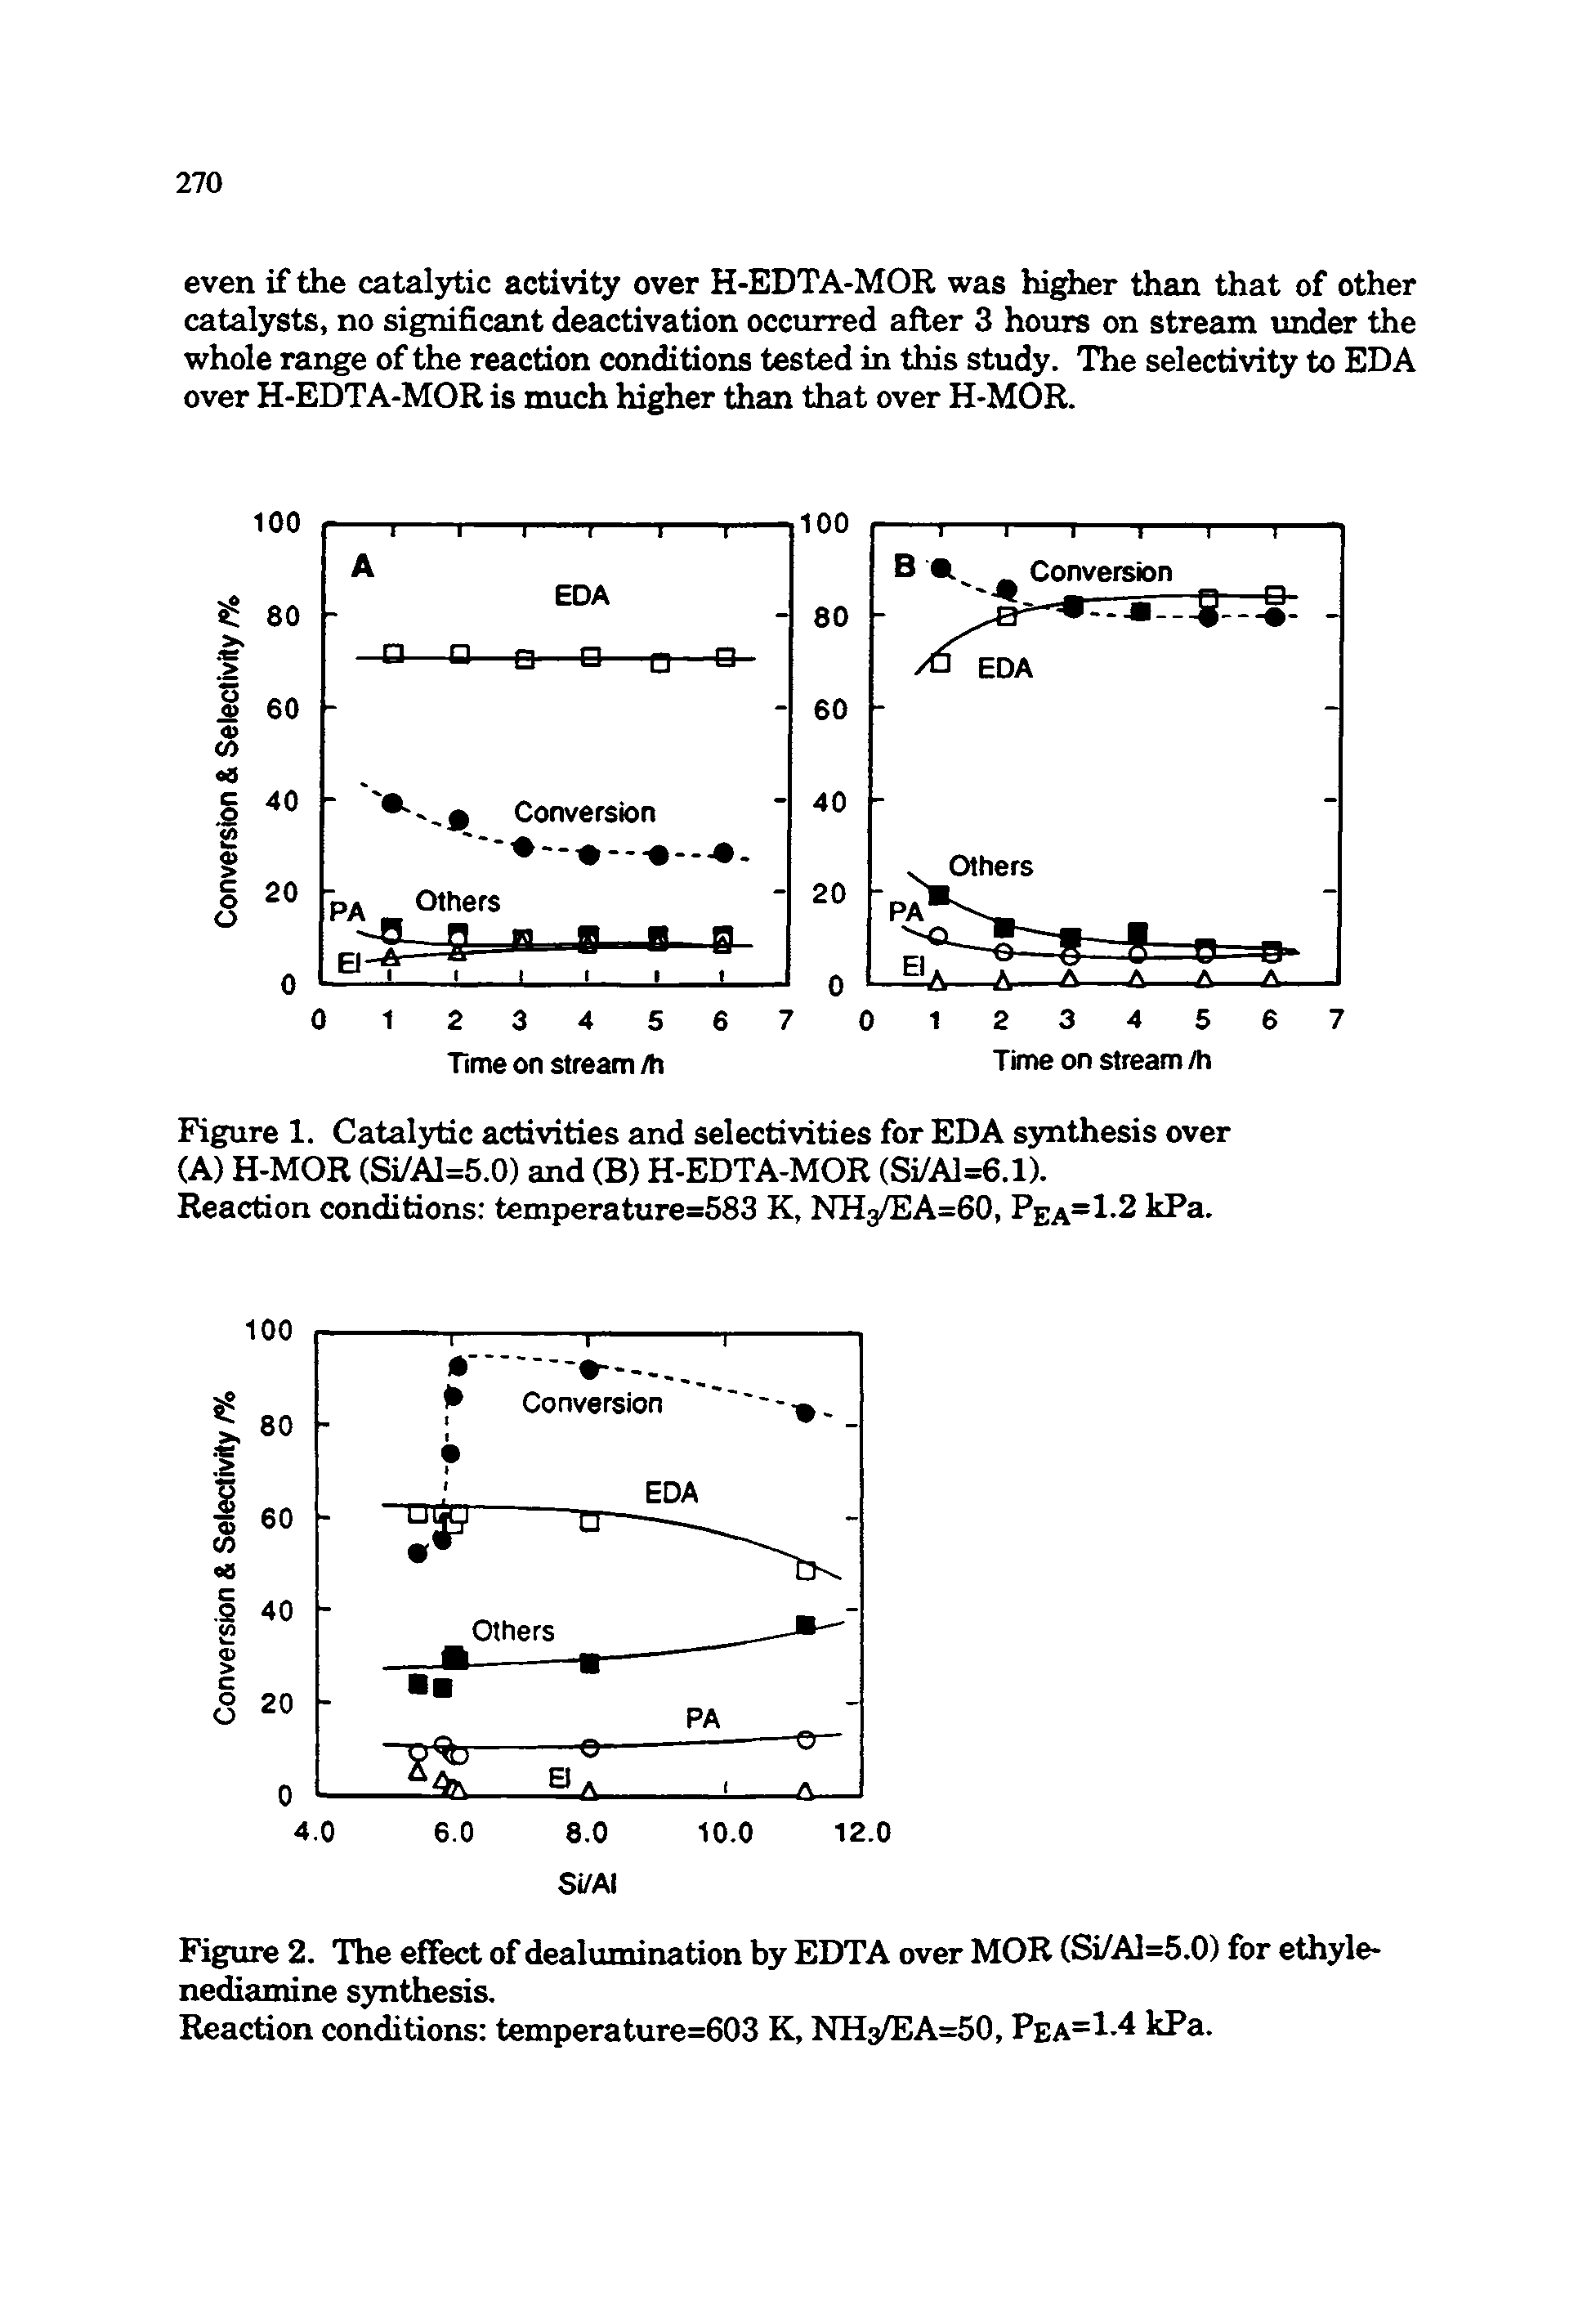 Figure 2. The effect of dealumination by EDTA over MOR (Si/Al=5.0) for ethyle-nediamine synthesis.